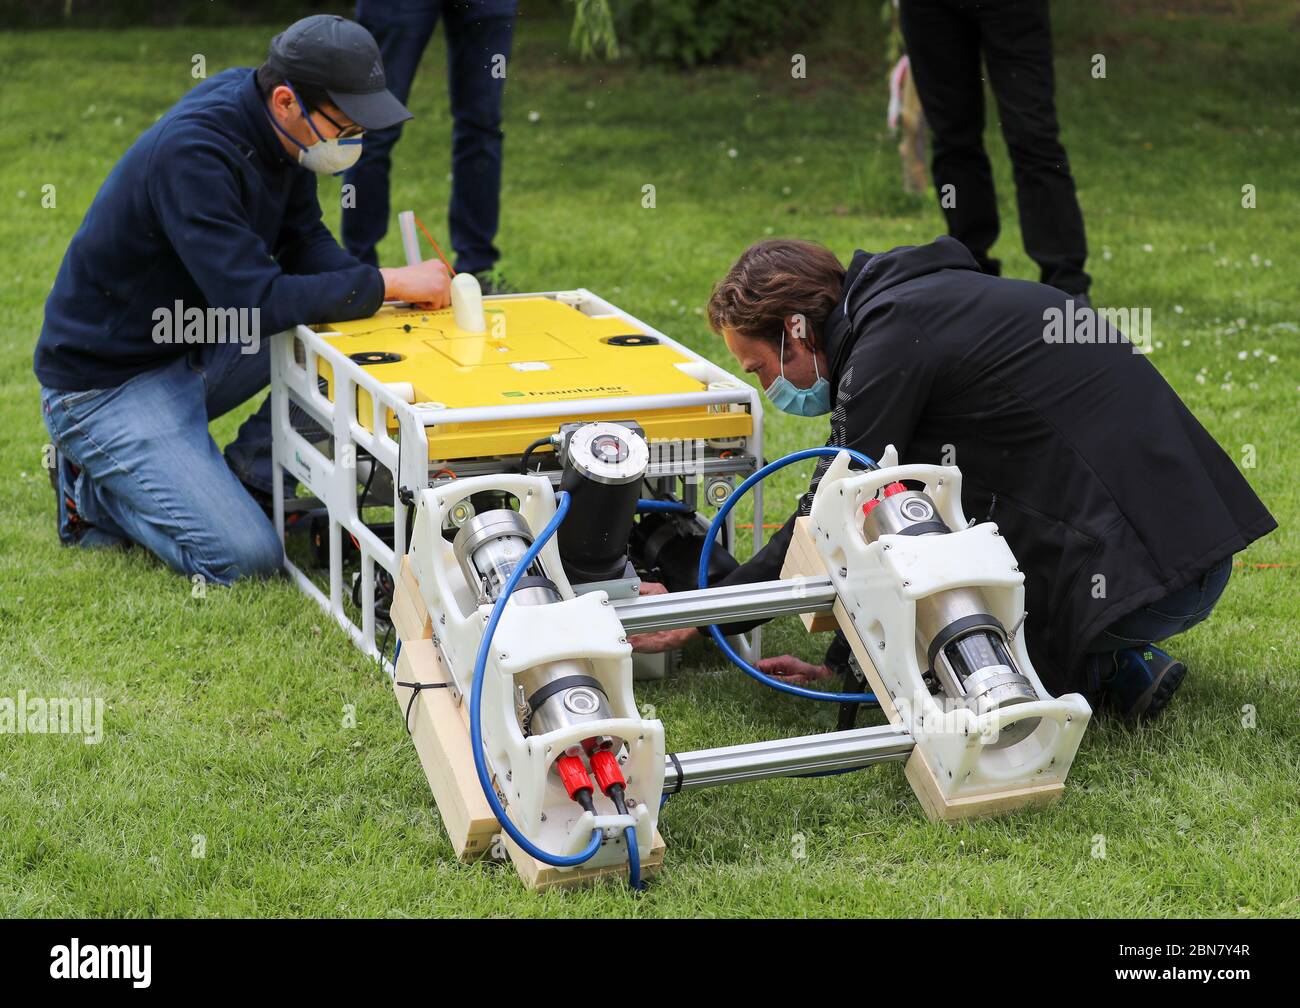 13 May 2020, Saxony-Anhalt, Seegebiet Mansfelder Land: Members of a research group are mounting a high-resolution 3D laser on a diving robot for an assignment in the Süßes See. With this new technique, a more than 3000 year old Bronze Age tomb and the remains of a medieval settlement are being surveyed at the lake's bottom. The technique is being used for the first time in Germany. With the new device not only individual buildings but complete structures can be recorded. The laser measures under water with millimetre precision and generates spatial images. In the last two years, archaeologists Stock Photo